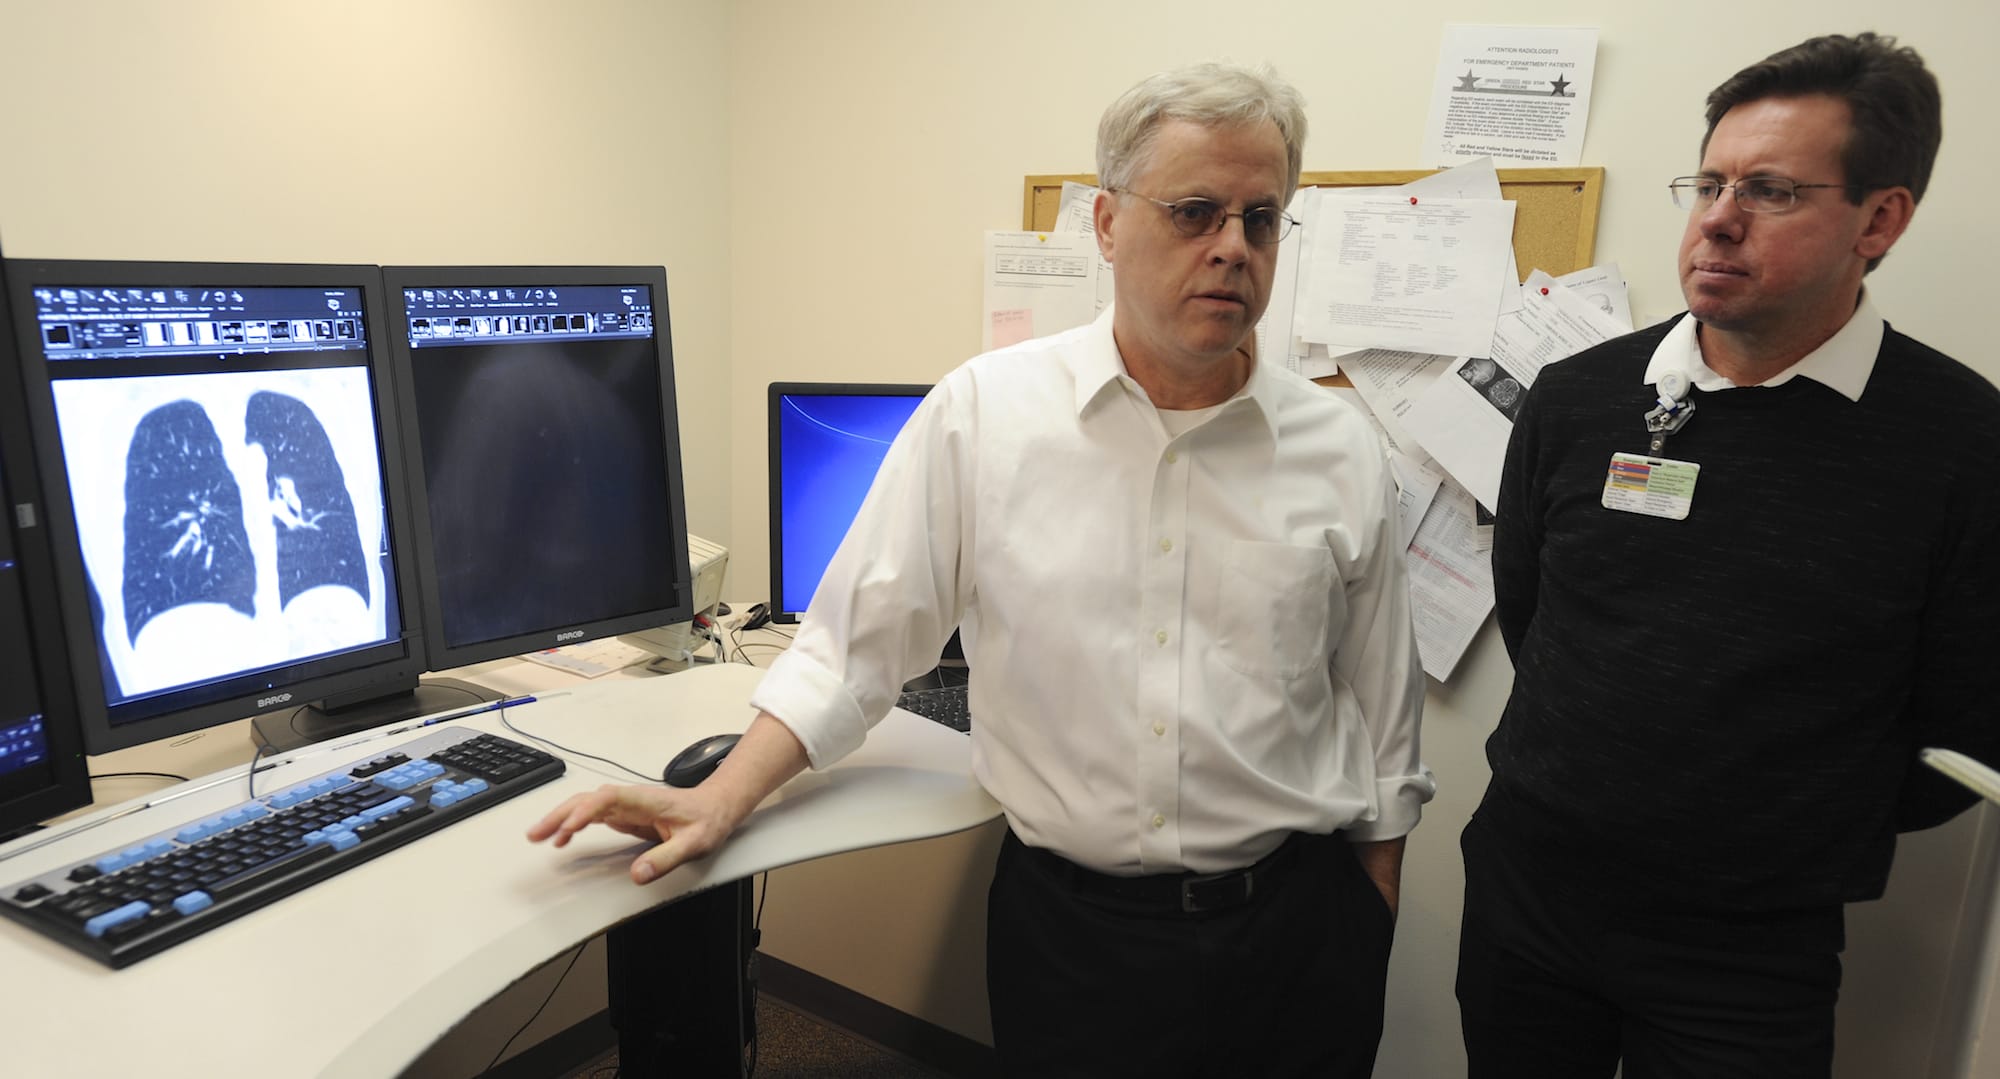 Radiologist William Kuhle, left, and Dr. Michael Myers, a radiation oncologist, discuss a new lung cancer screening program to roll out next month at PeaceHealth Southwest Medical Center in Vancouver. The program will follow the first lung cancer screening recommendations implemented in the U.S.